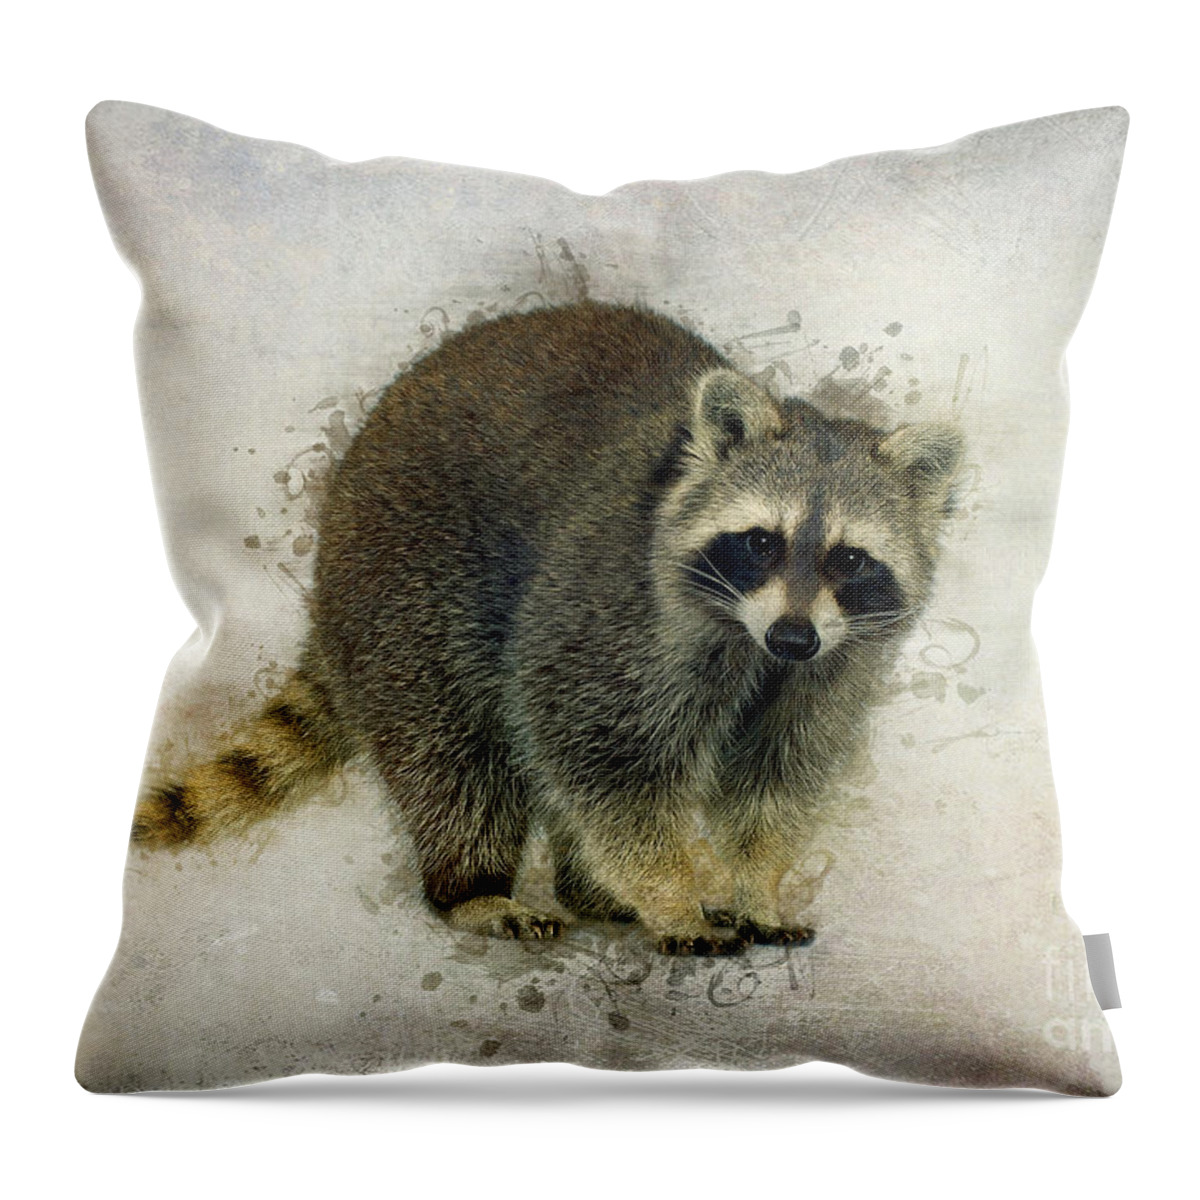 Animal Throw Pillow featuring the digital art Raccoon by Ian Mitchell